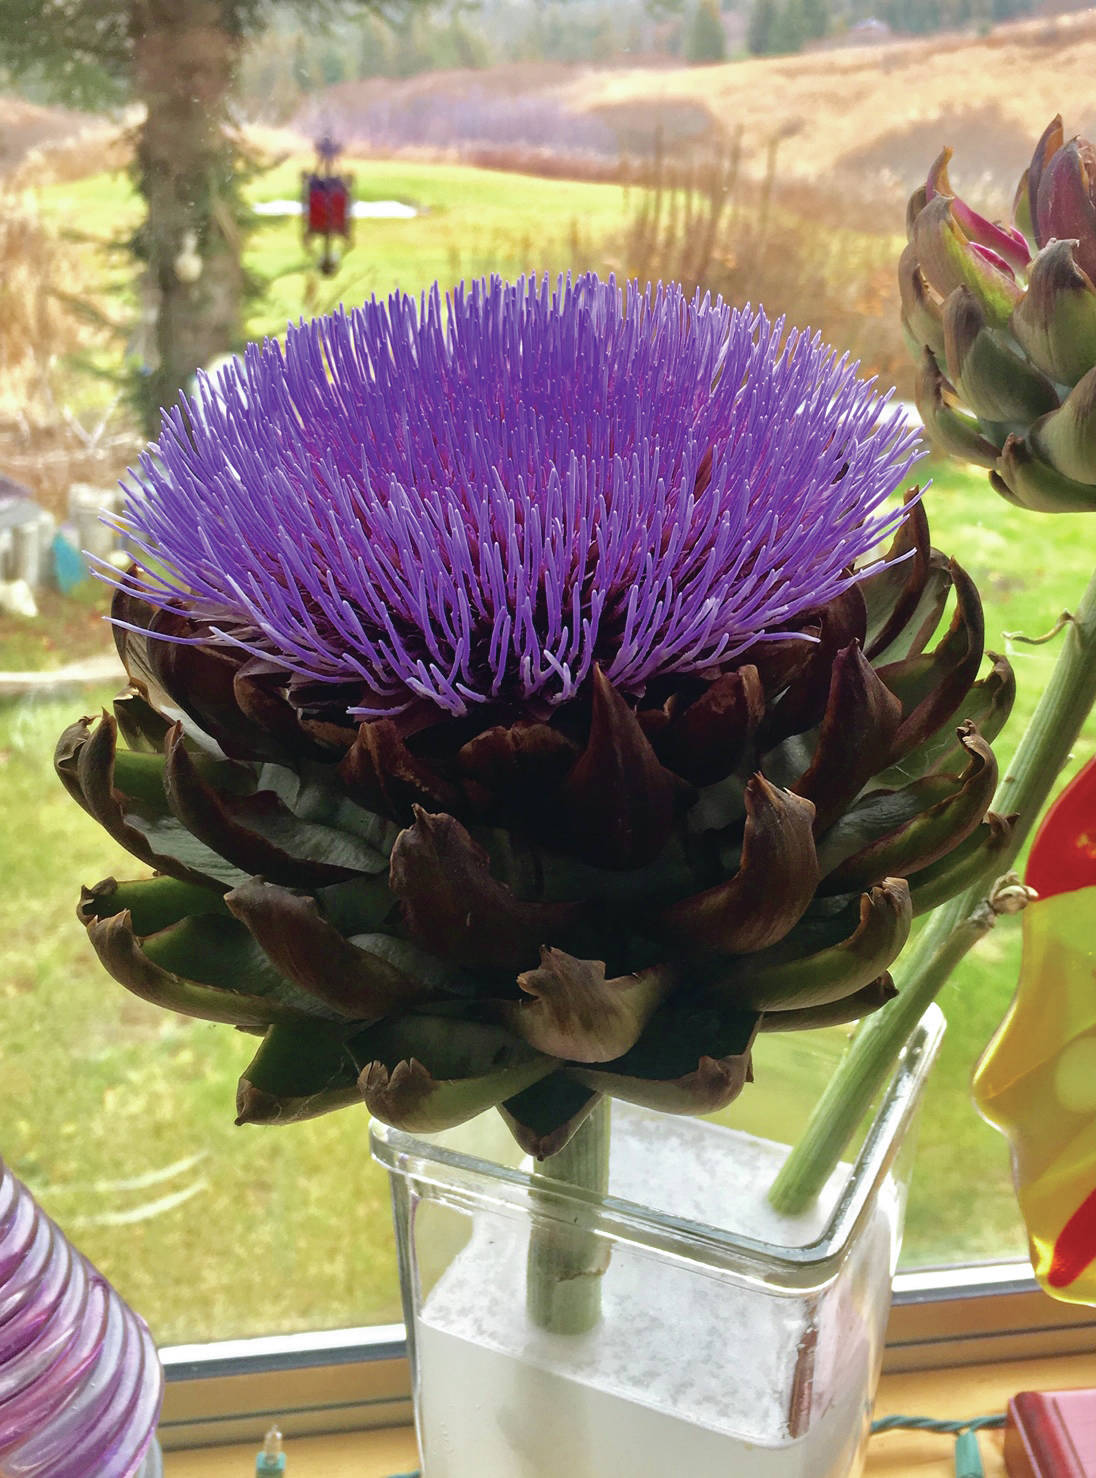 “Nancy Wise had the courage to allow her artichoke to bloom and is rewarded with this truly magnificent specimen,” writes Rosemary Fitzpatrick, as seen on Oct. 29, 2019, at Wise’s home near Homer, Alaska. (Photo by Nancy Wise.)